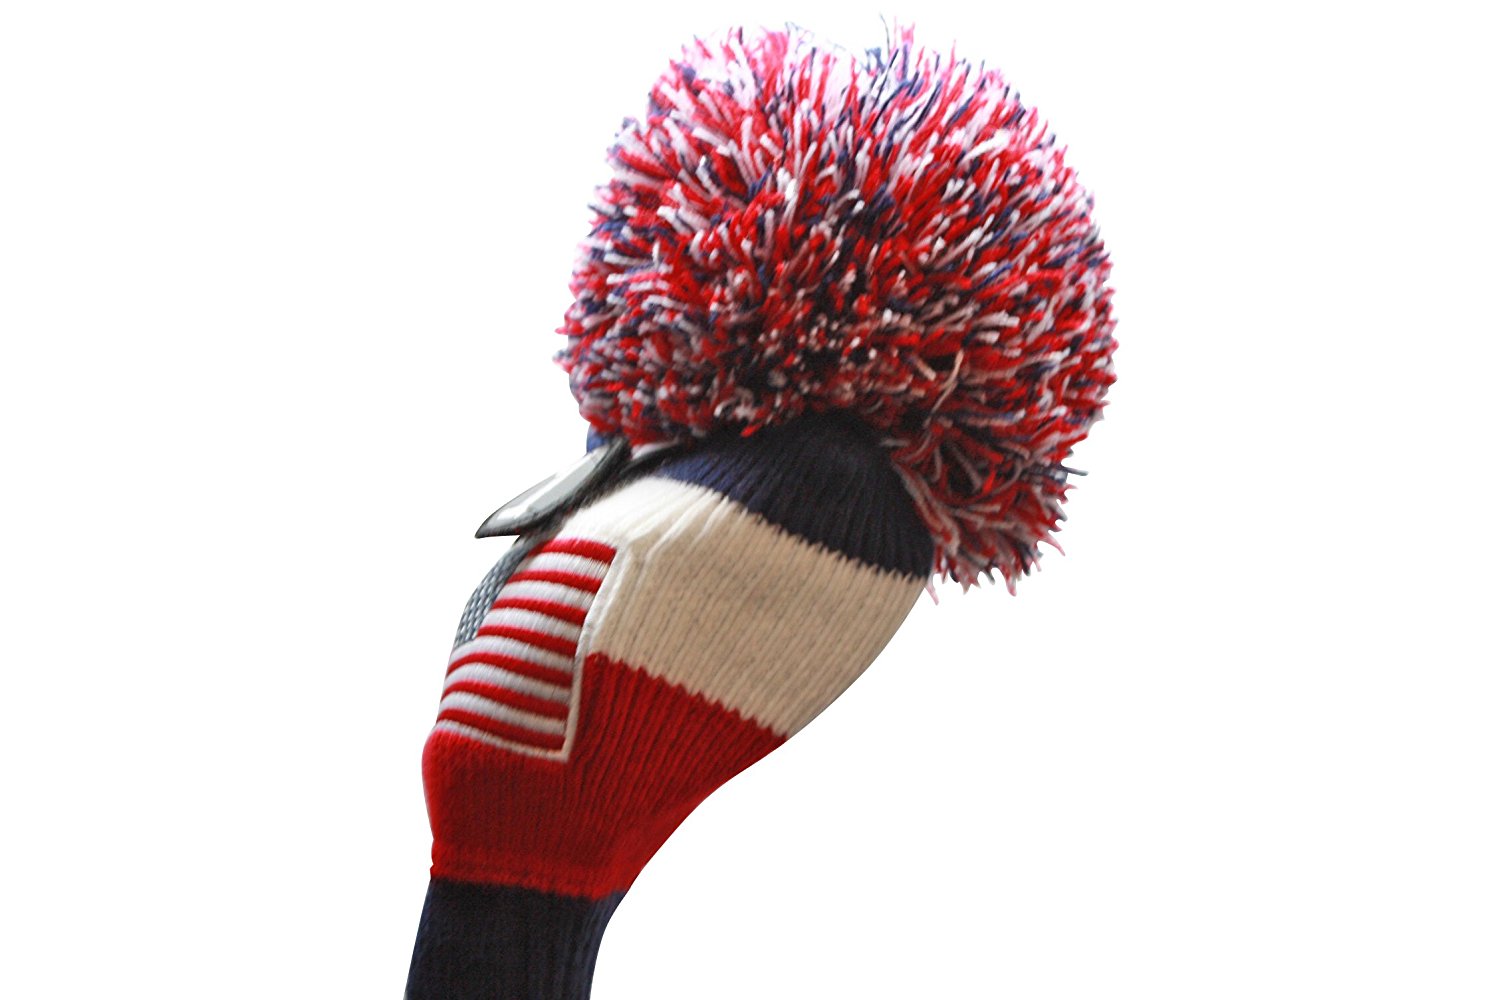 USA Majek Golf Club #3 Fairway Wood Pom Pom Knit Classic Traditional Retro Head Cover Headcover for Metal Woods - image 3 of 4